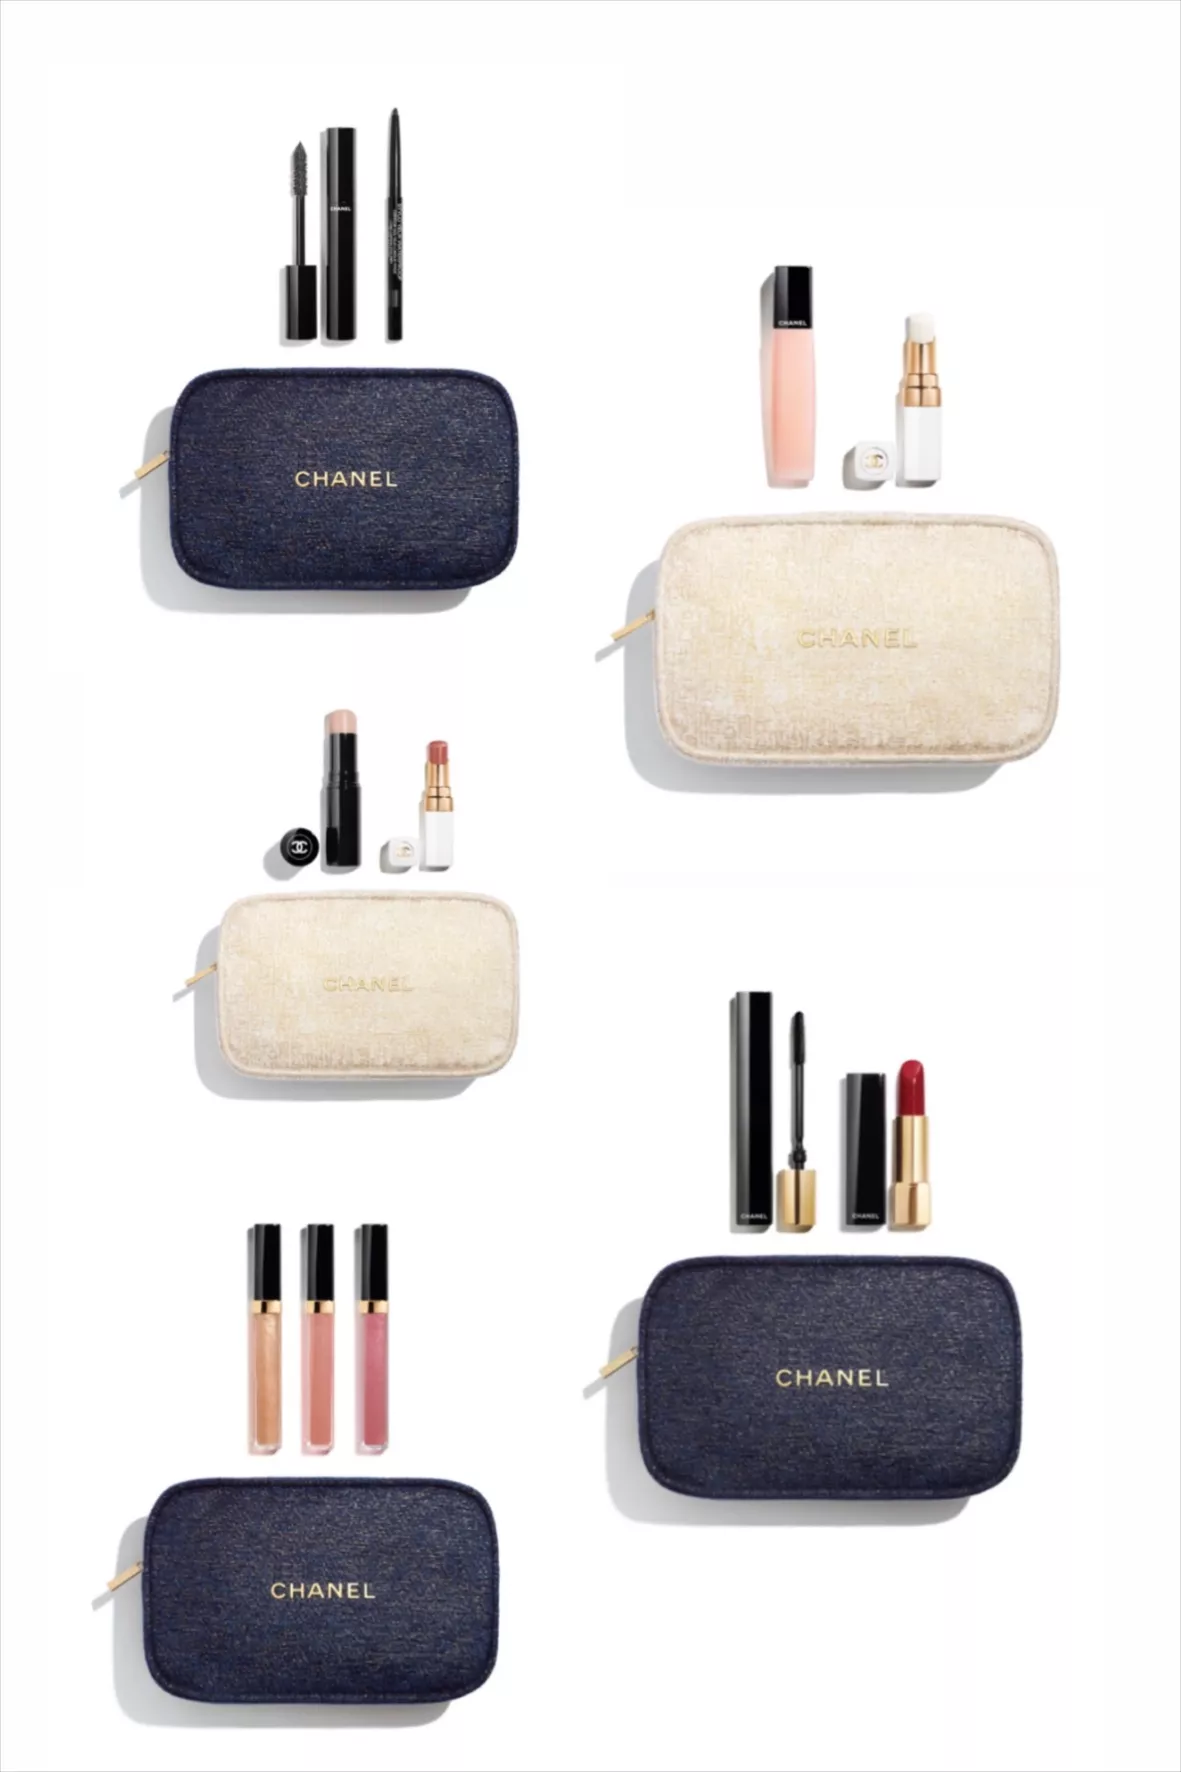 CHANEL HOLIDAY make up pouch set 2020